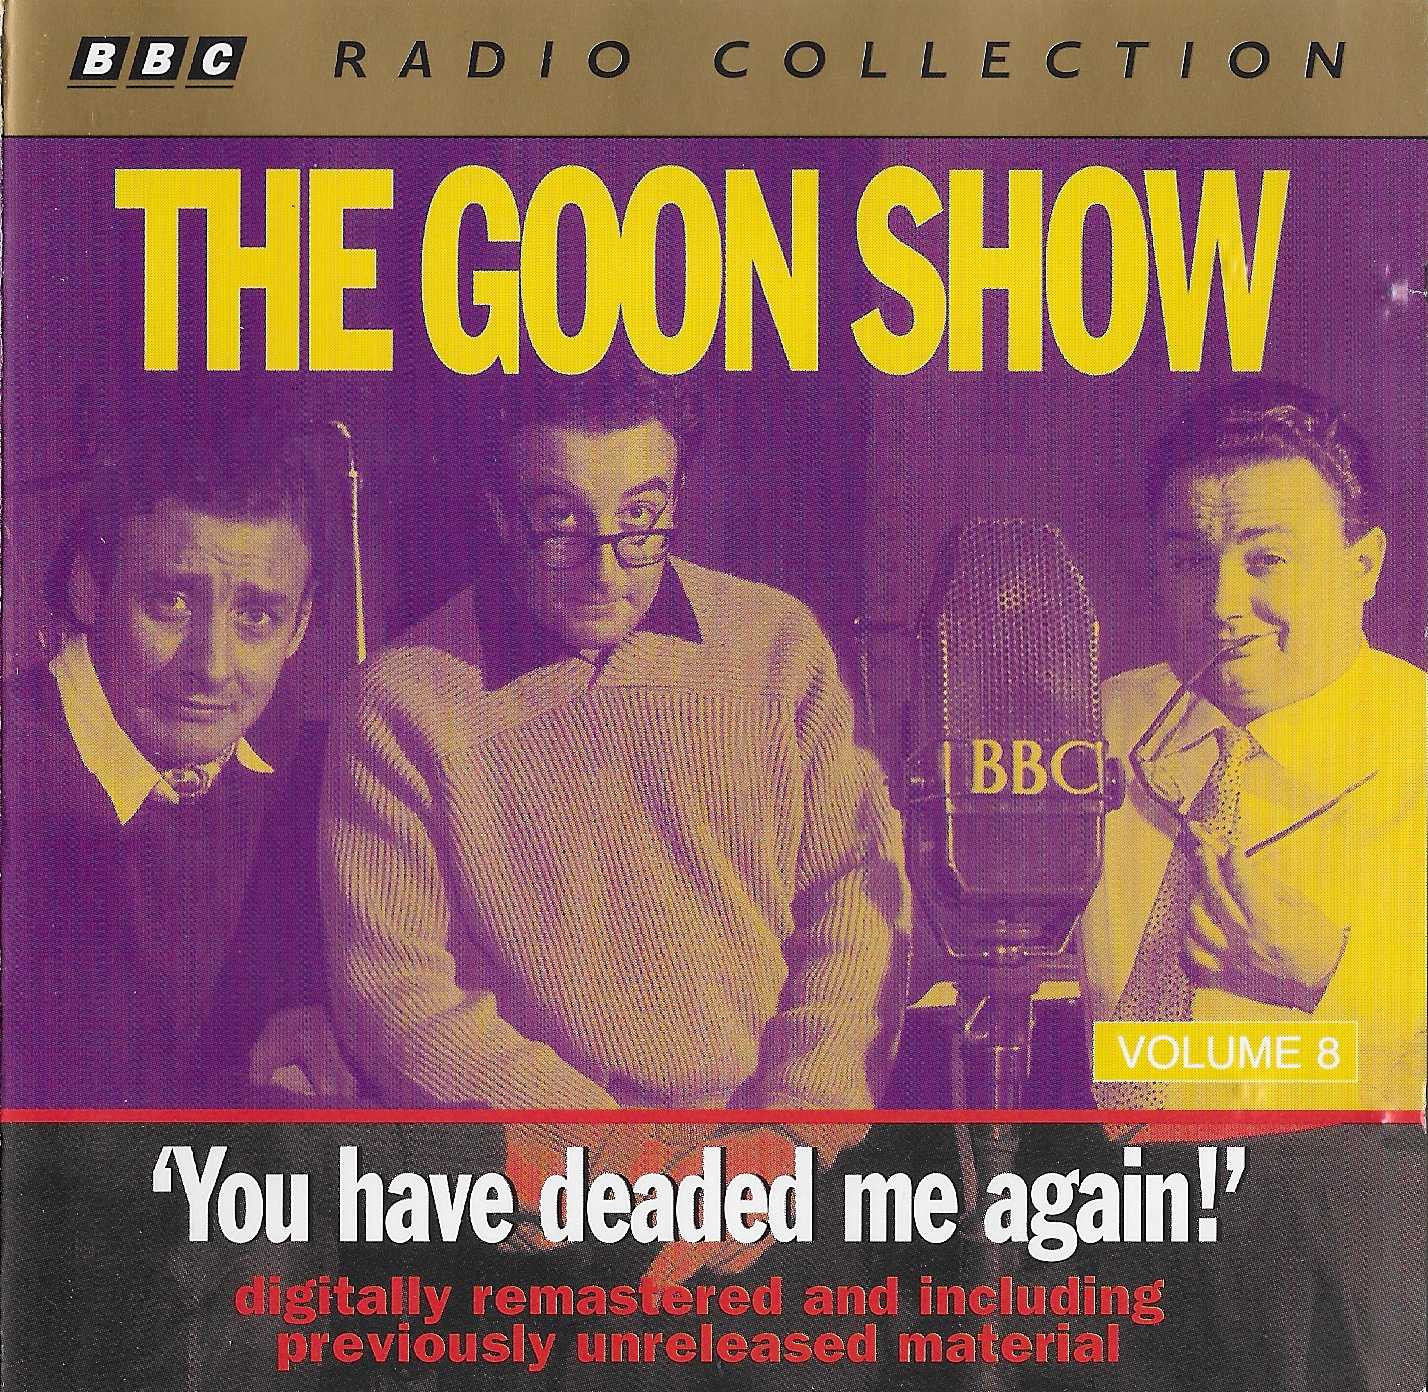 Picture of The Goon Show 8 - You have deaded me again! by artist Spike Milligan / Eric Sykes from the BBC cds - Records and Tapes library